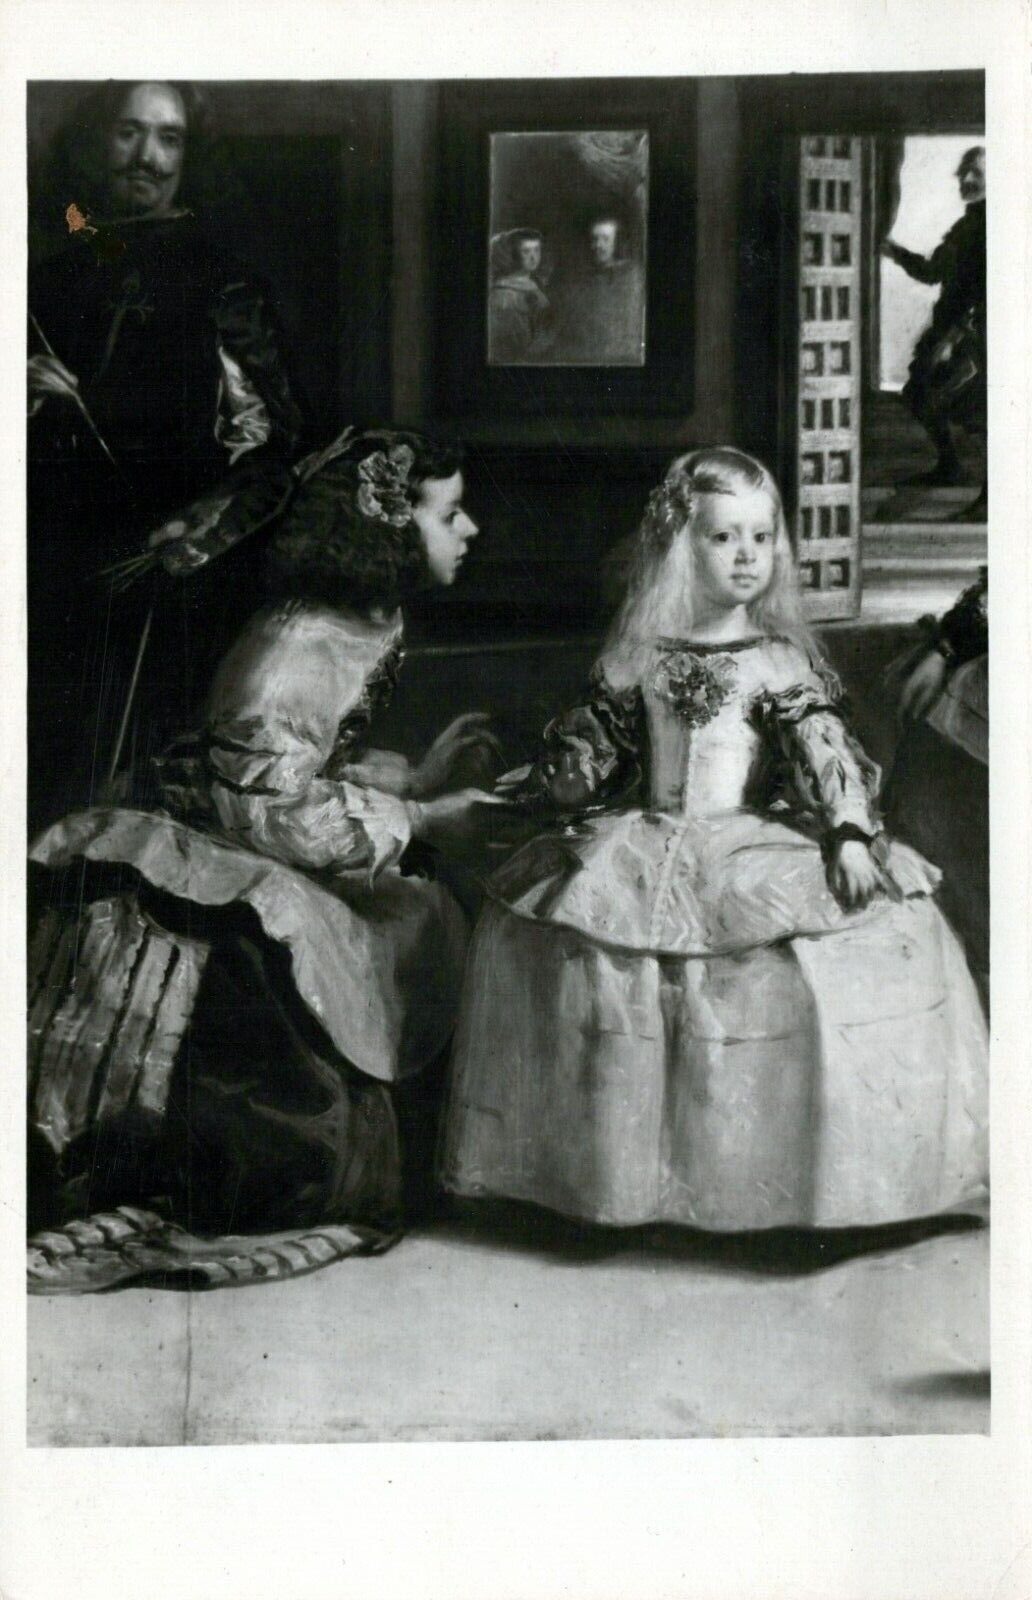 RPPC - Posted Glossy Postcard. Theatrical Performance by Children, Las Meninas